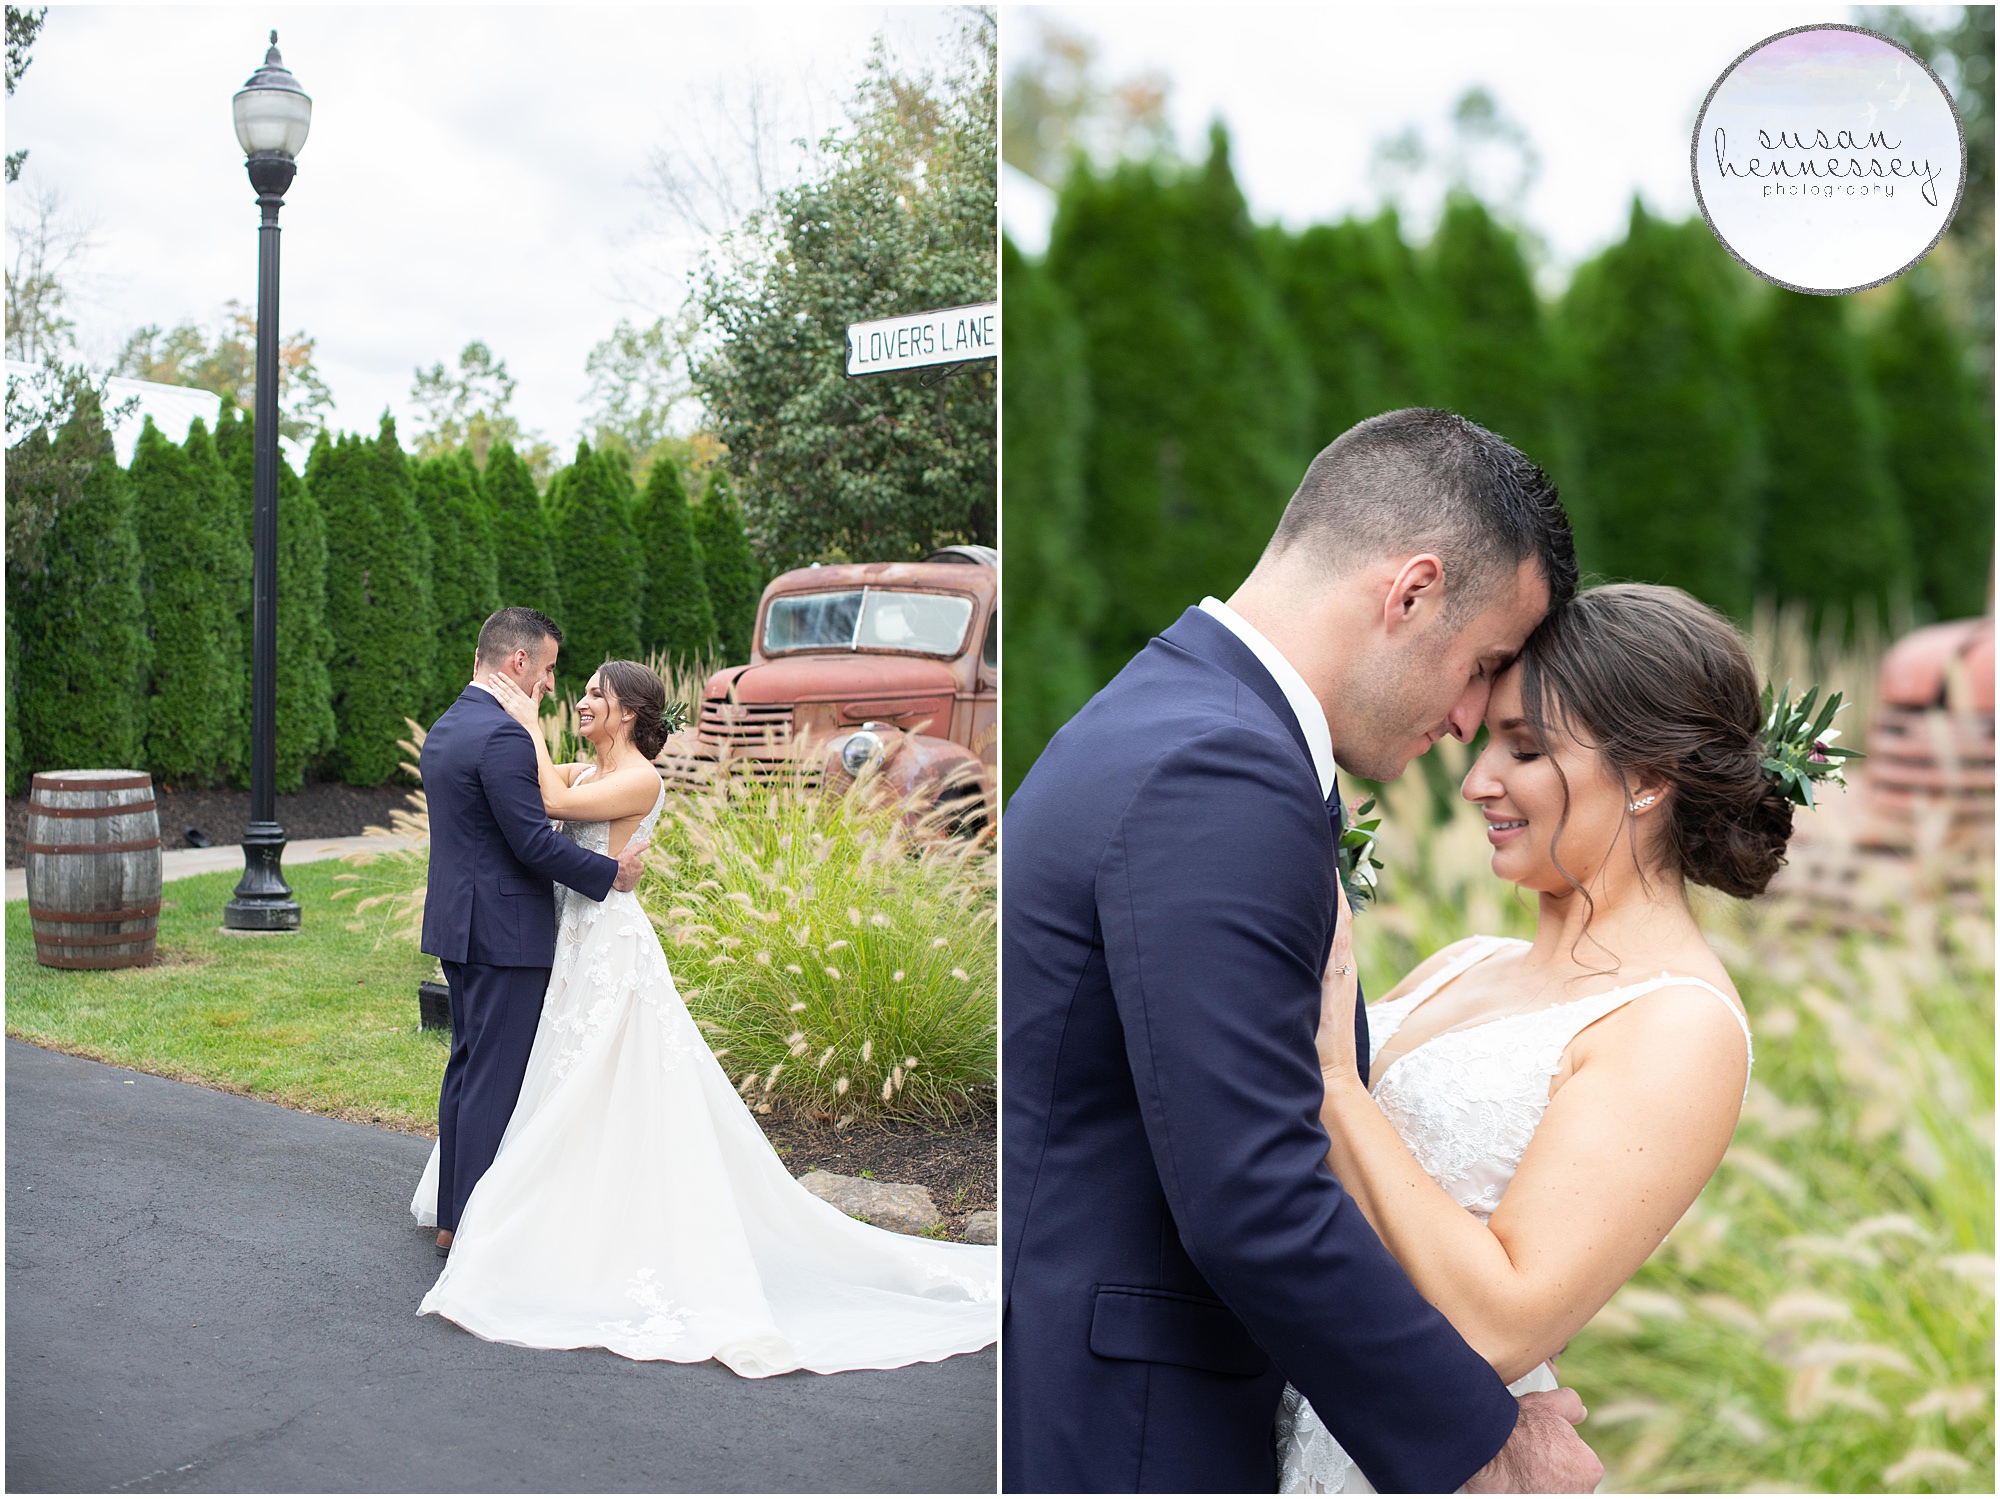 Just married portraits at The Hamilton Manor wedding